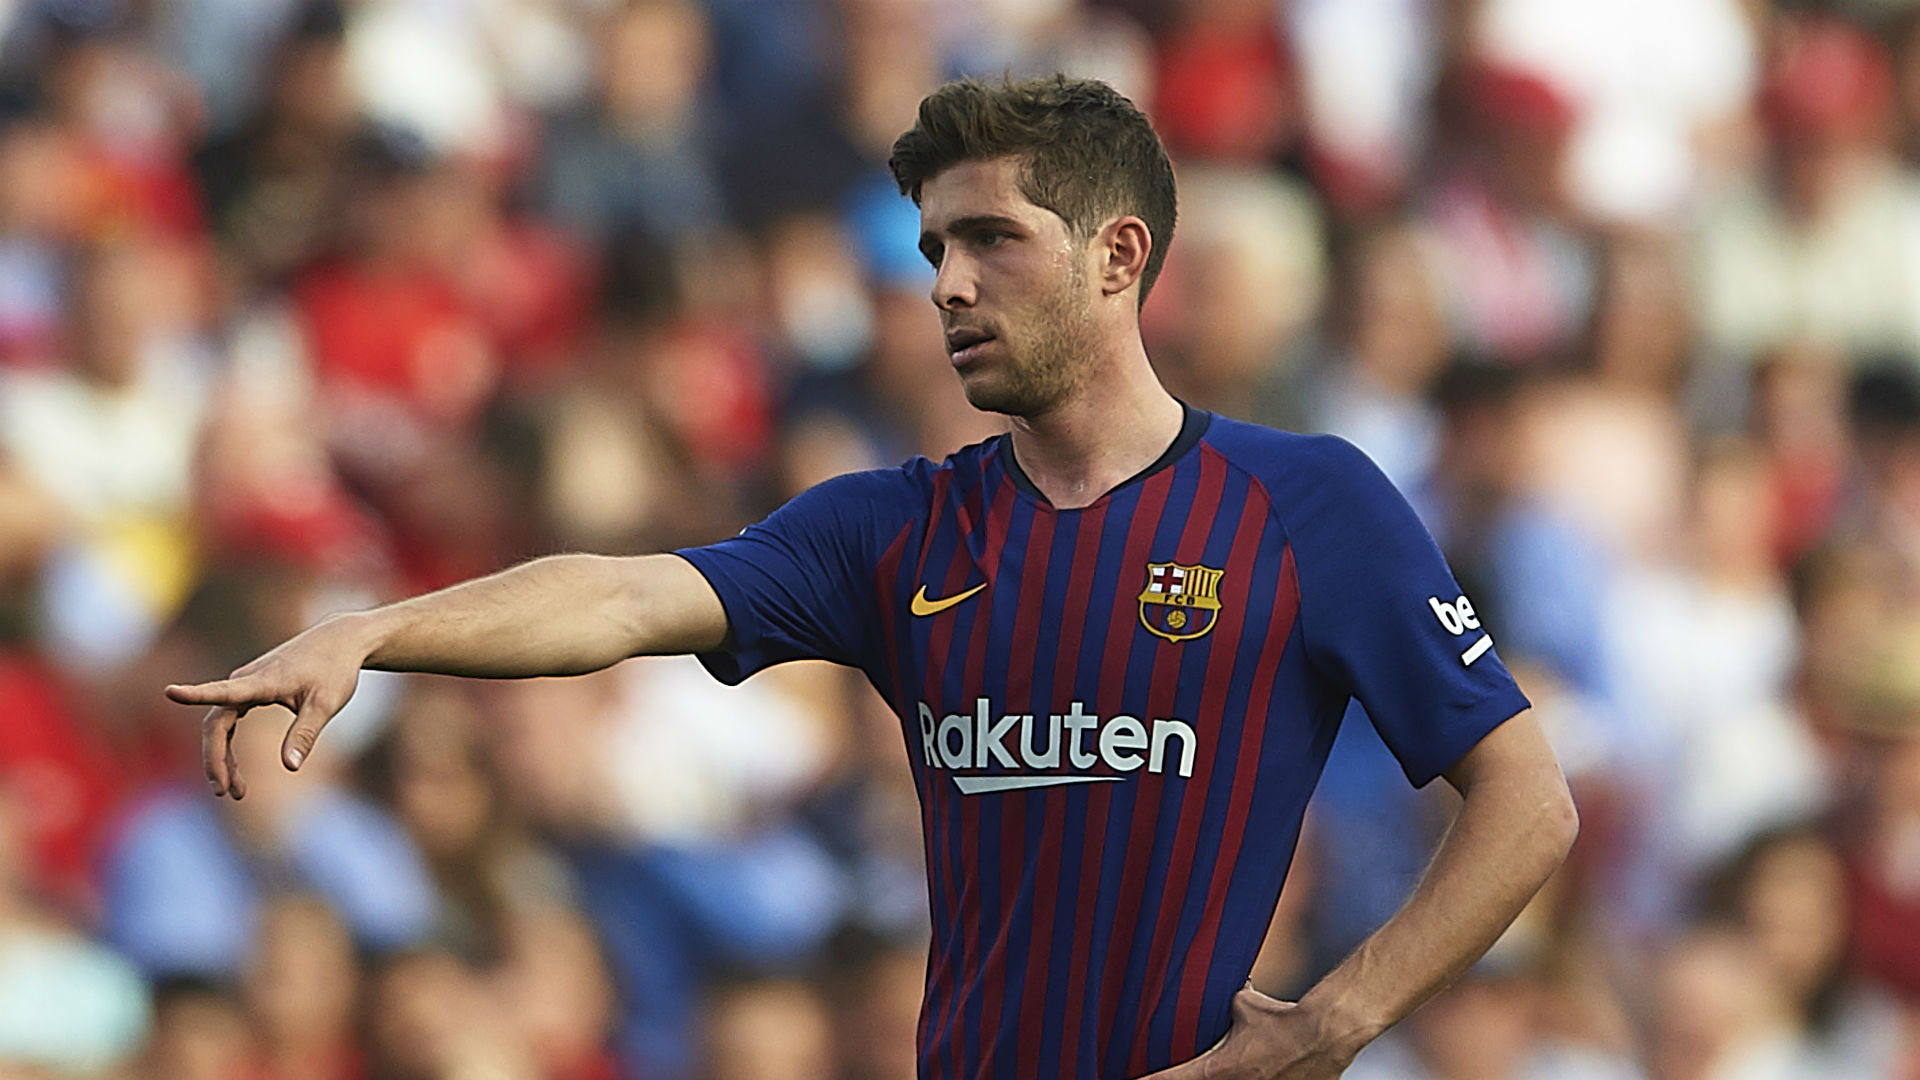 Barcelona face Napoli and Real Madrid in the coming week but will do so without Sergi Roberto.